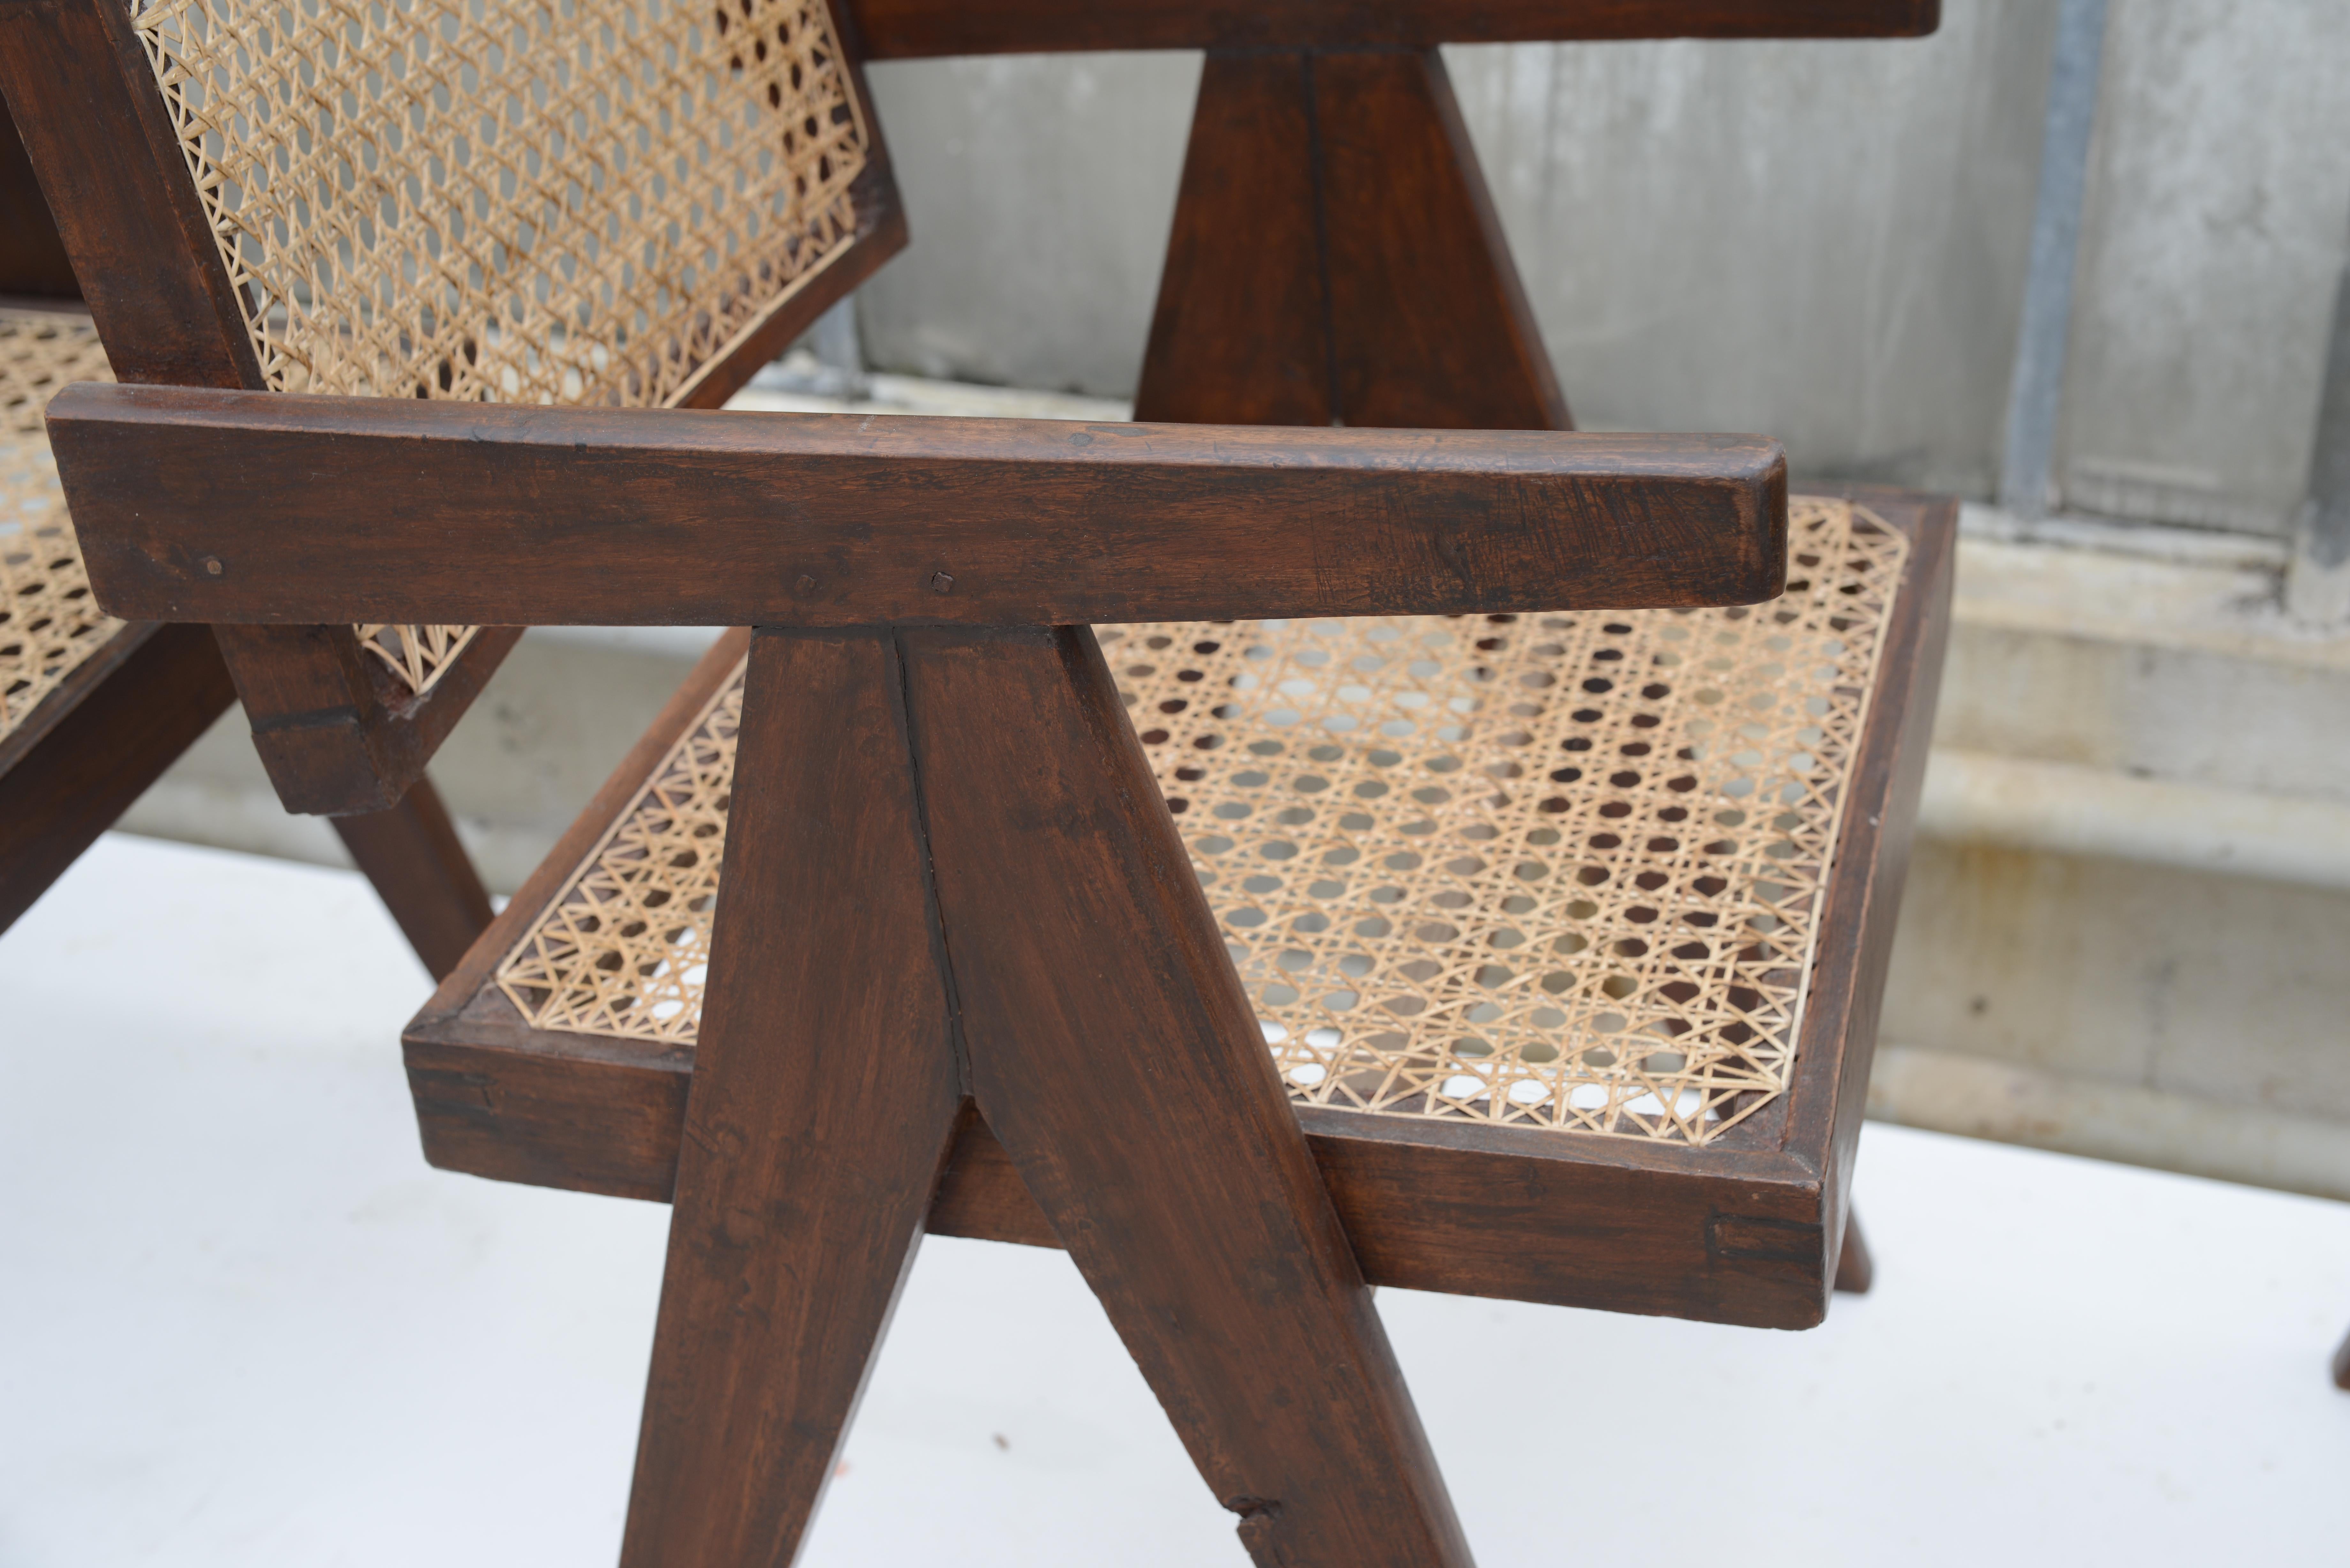 Pierre Jeanneret Set of 4 Chairs / Authentic Mid-Century Modern PJ-SI-28-A 4